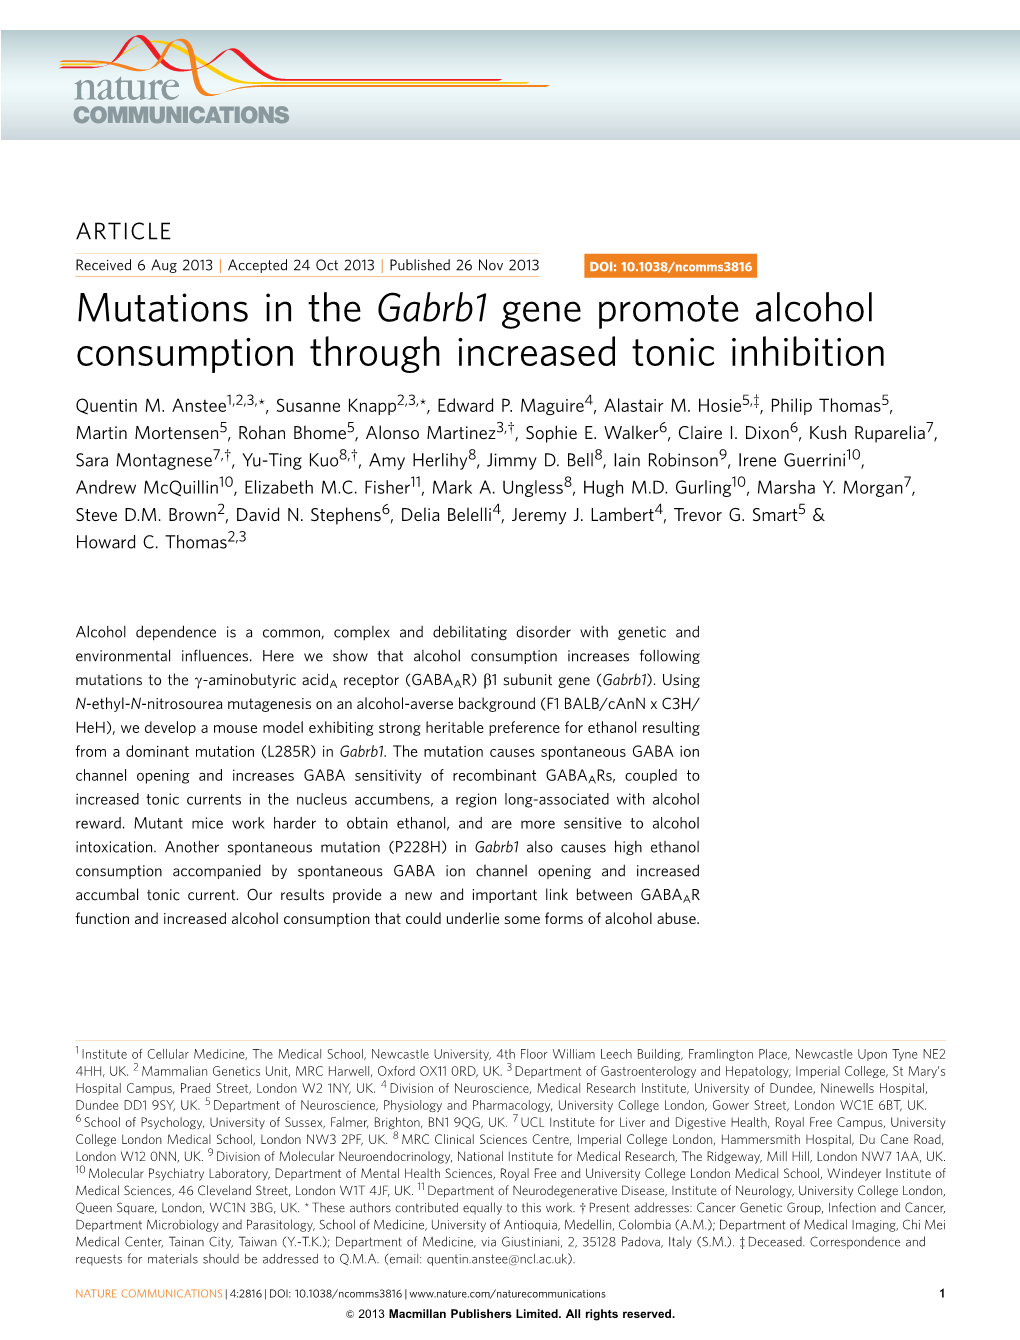 Mutations in the Gabrb1 Gene Promote Alcohol Consumption Through Increased Tonic Inhibition